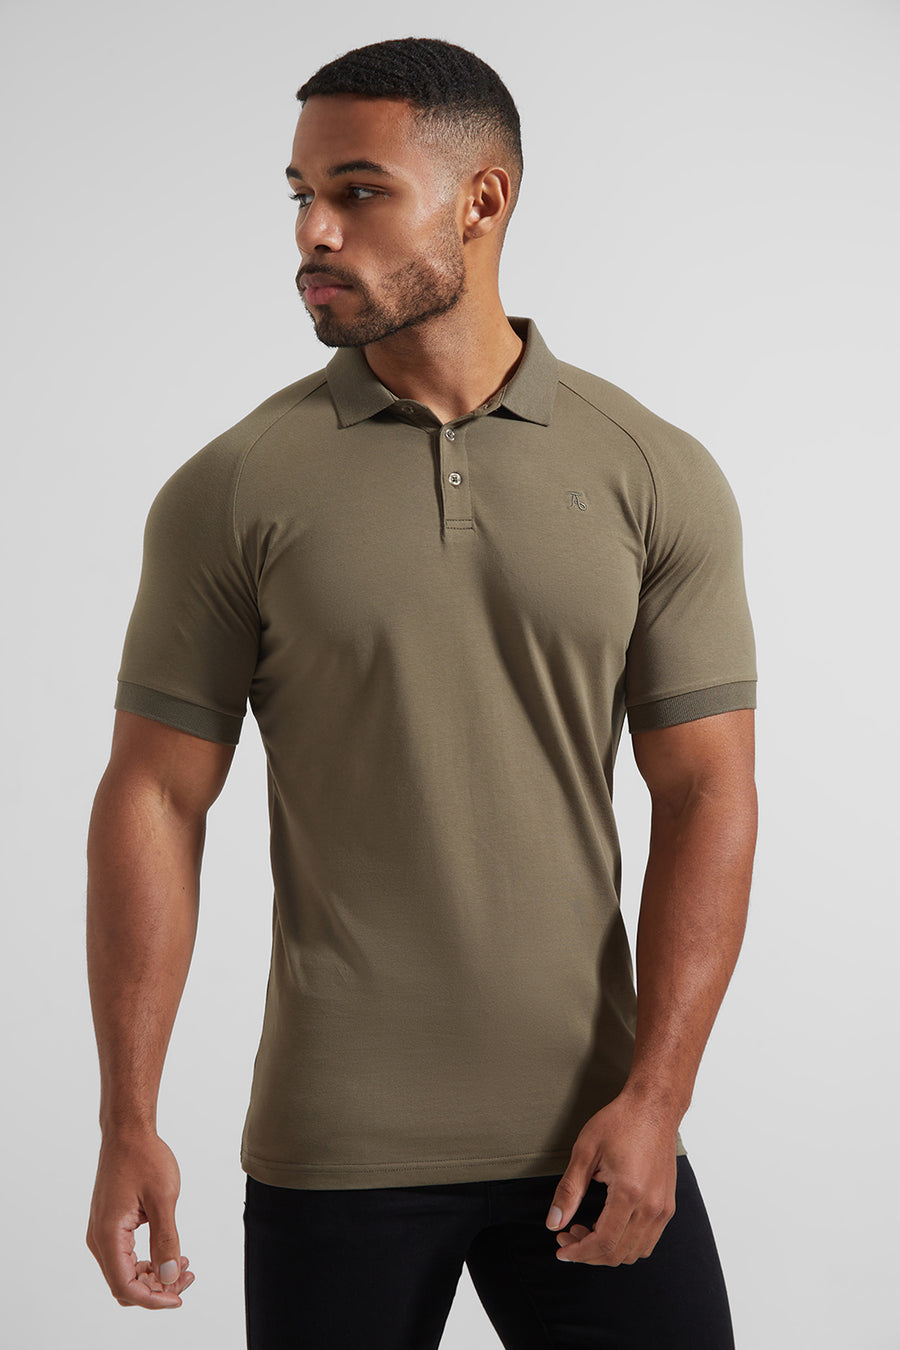 Athletic Fit Polo Shirts - Tailored Athlete - TAILORED ATHLETE - USA